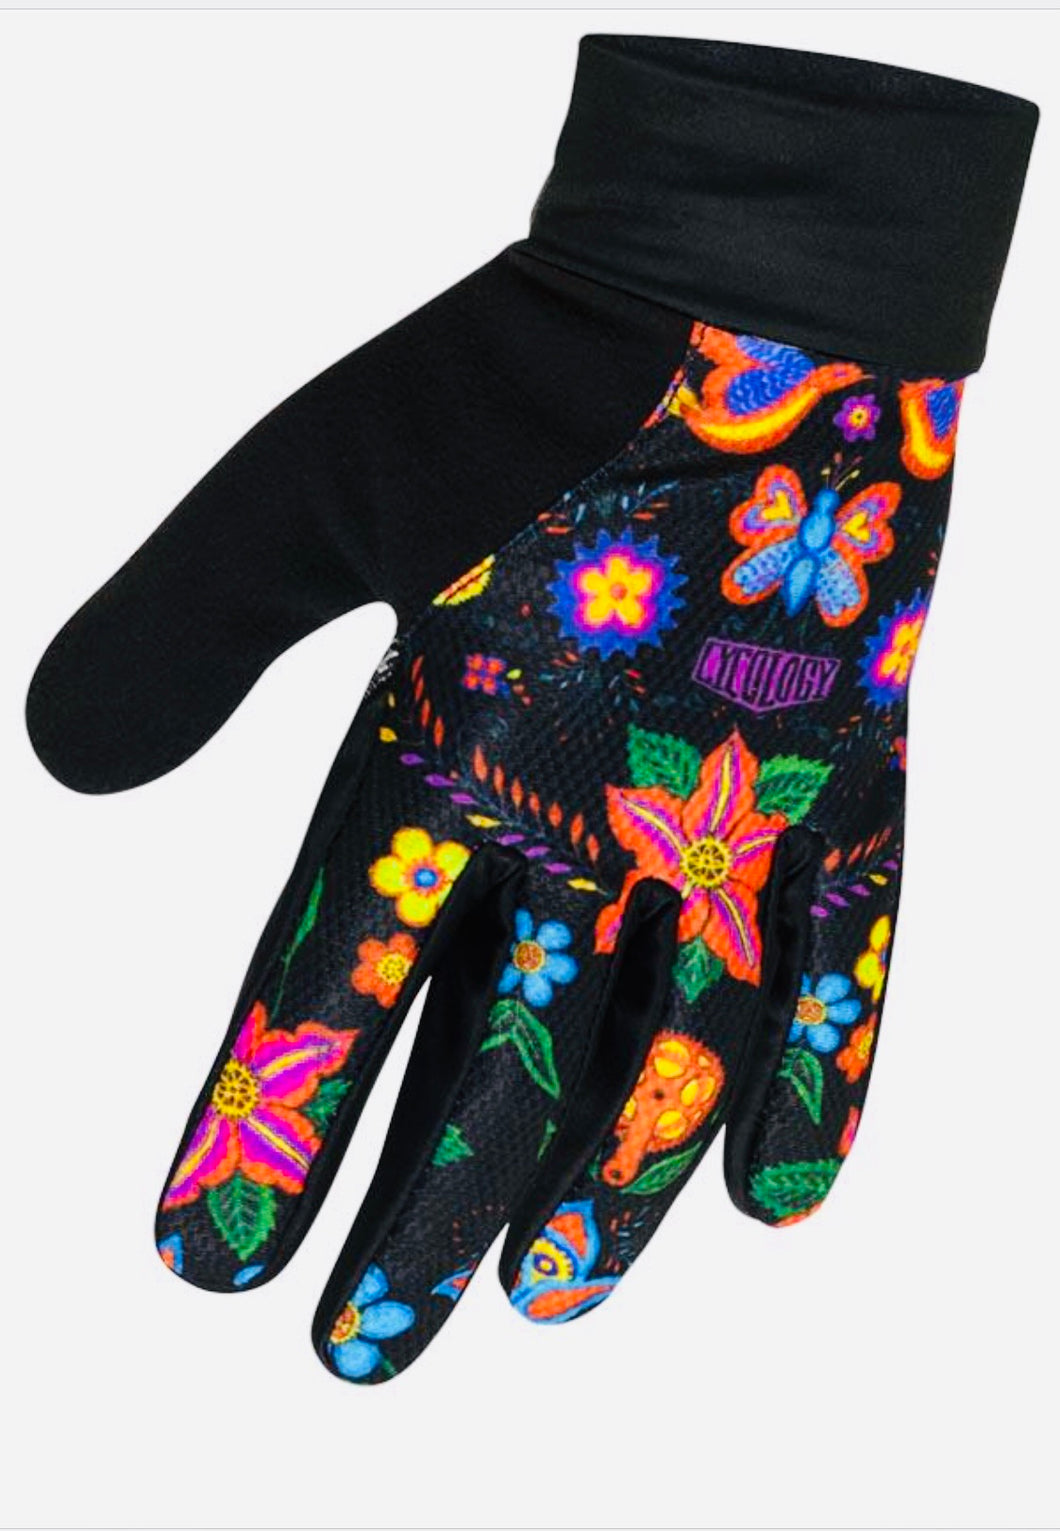 Cycology Quality Unisex Long-Fingered Cycling Gloves - Design Frida